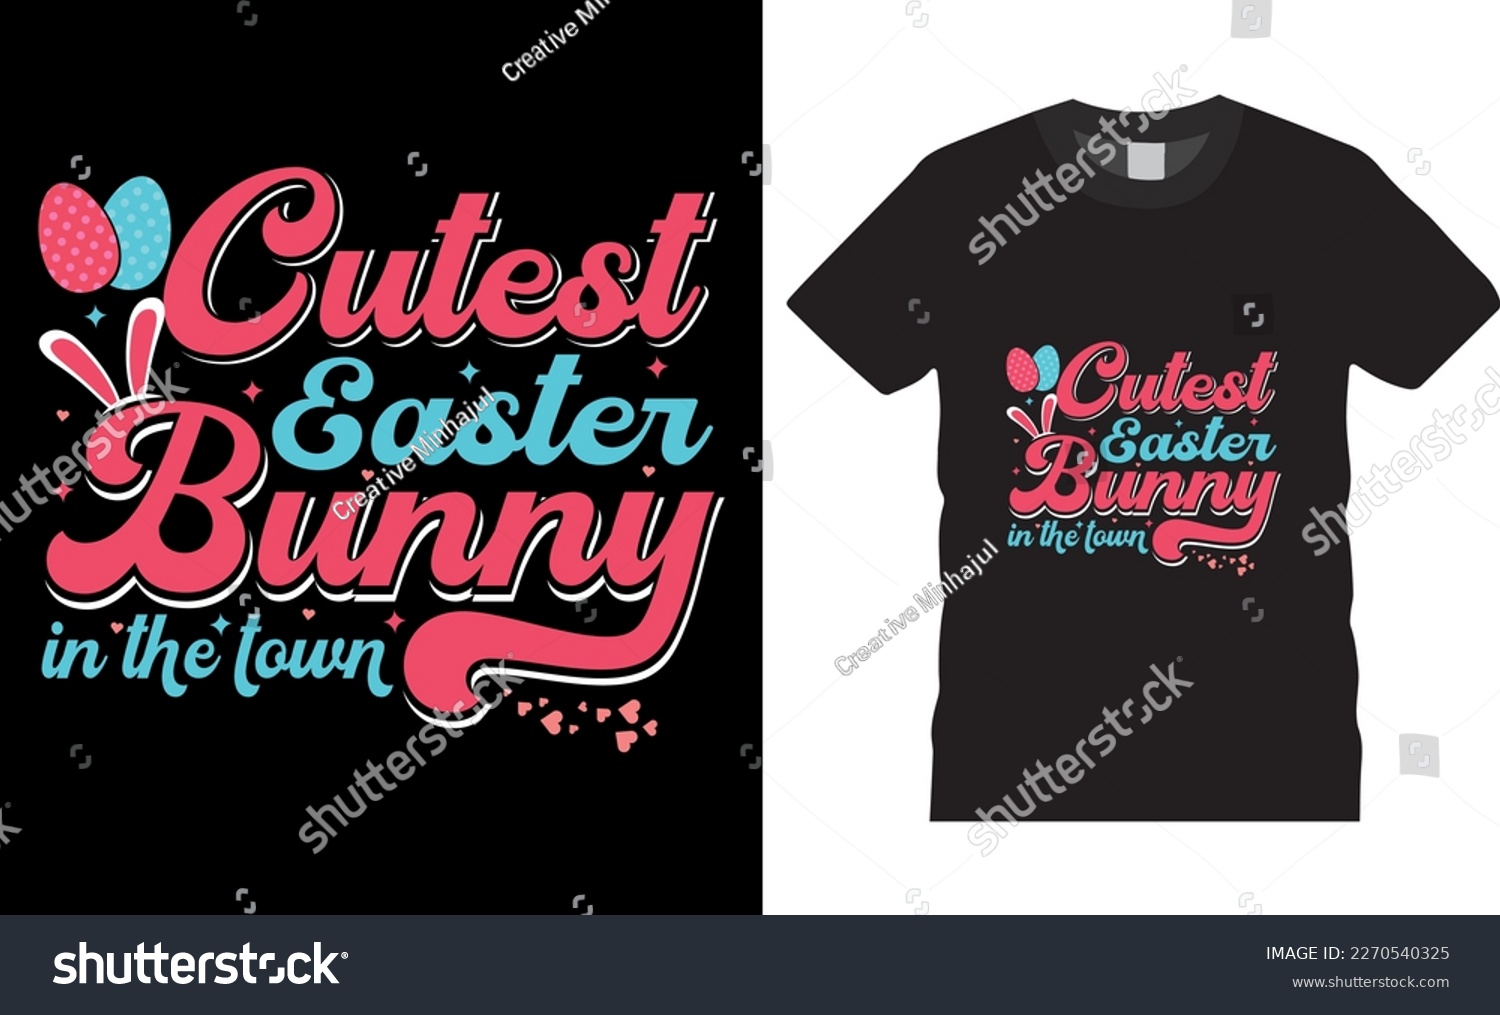 SVG of Happy easter rabbit, bunny tshirt vector design template.cutest easter bunny in the town t-shirt design.Ready to print for apparel, poster, mug and greeting plate illustration. svg